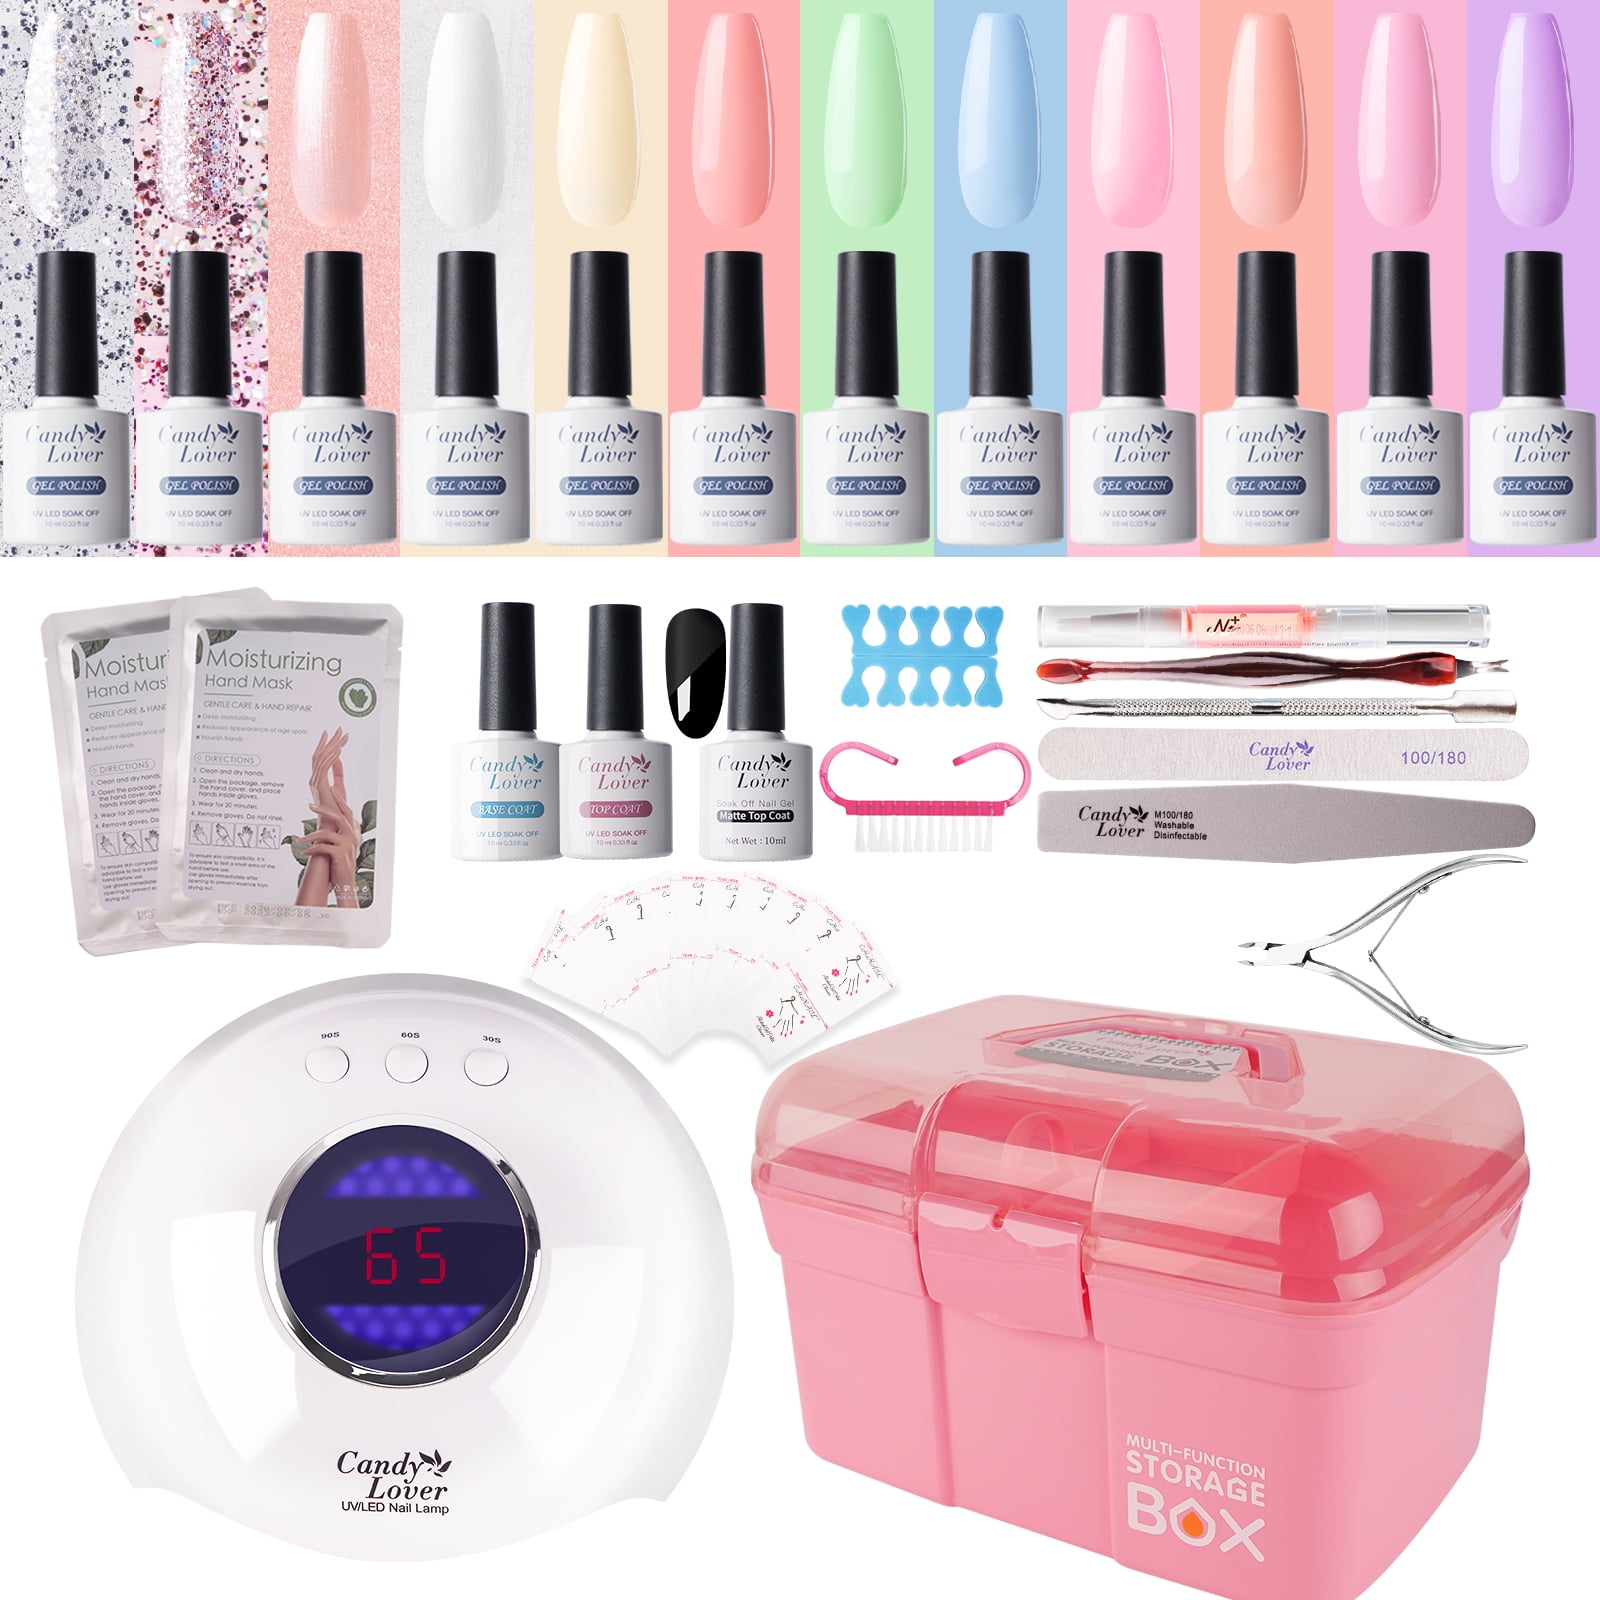 Candy Lover Gel Nail Kit with LED UV Lamp, Natural Quick Dry Long-Lasting Gel  Polish, High Class 12 Colors Set, All-in-one Gel Nail Polish Kit Gift, Teen  Girl Lady Women at Home